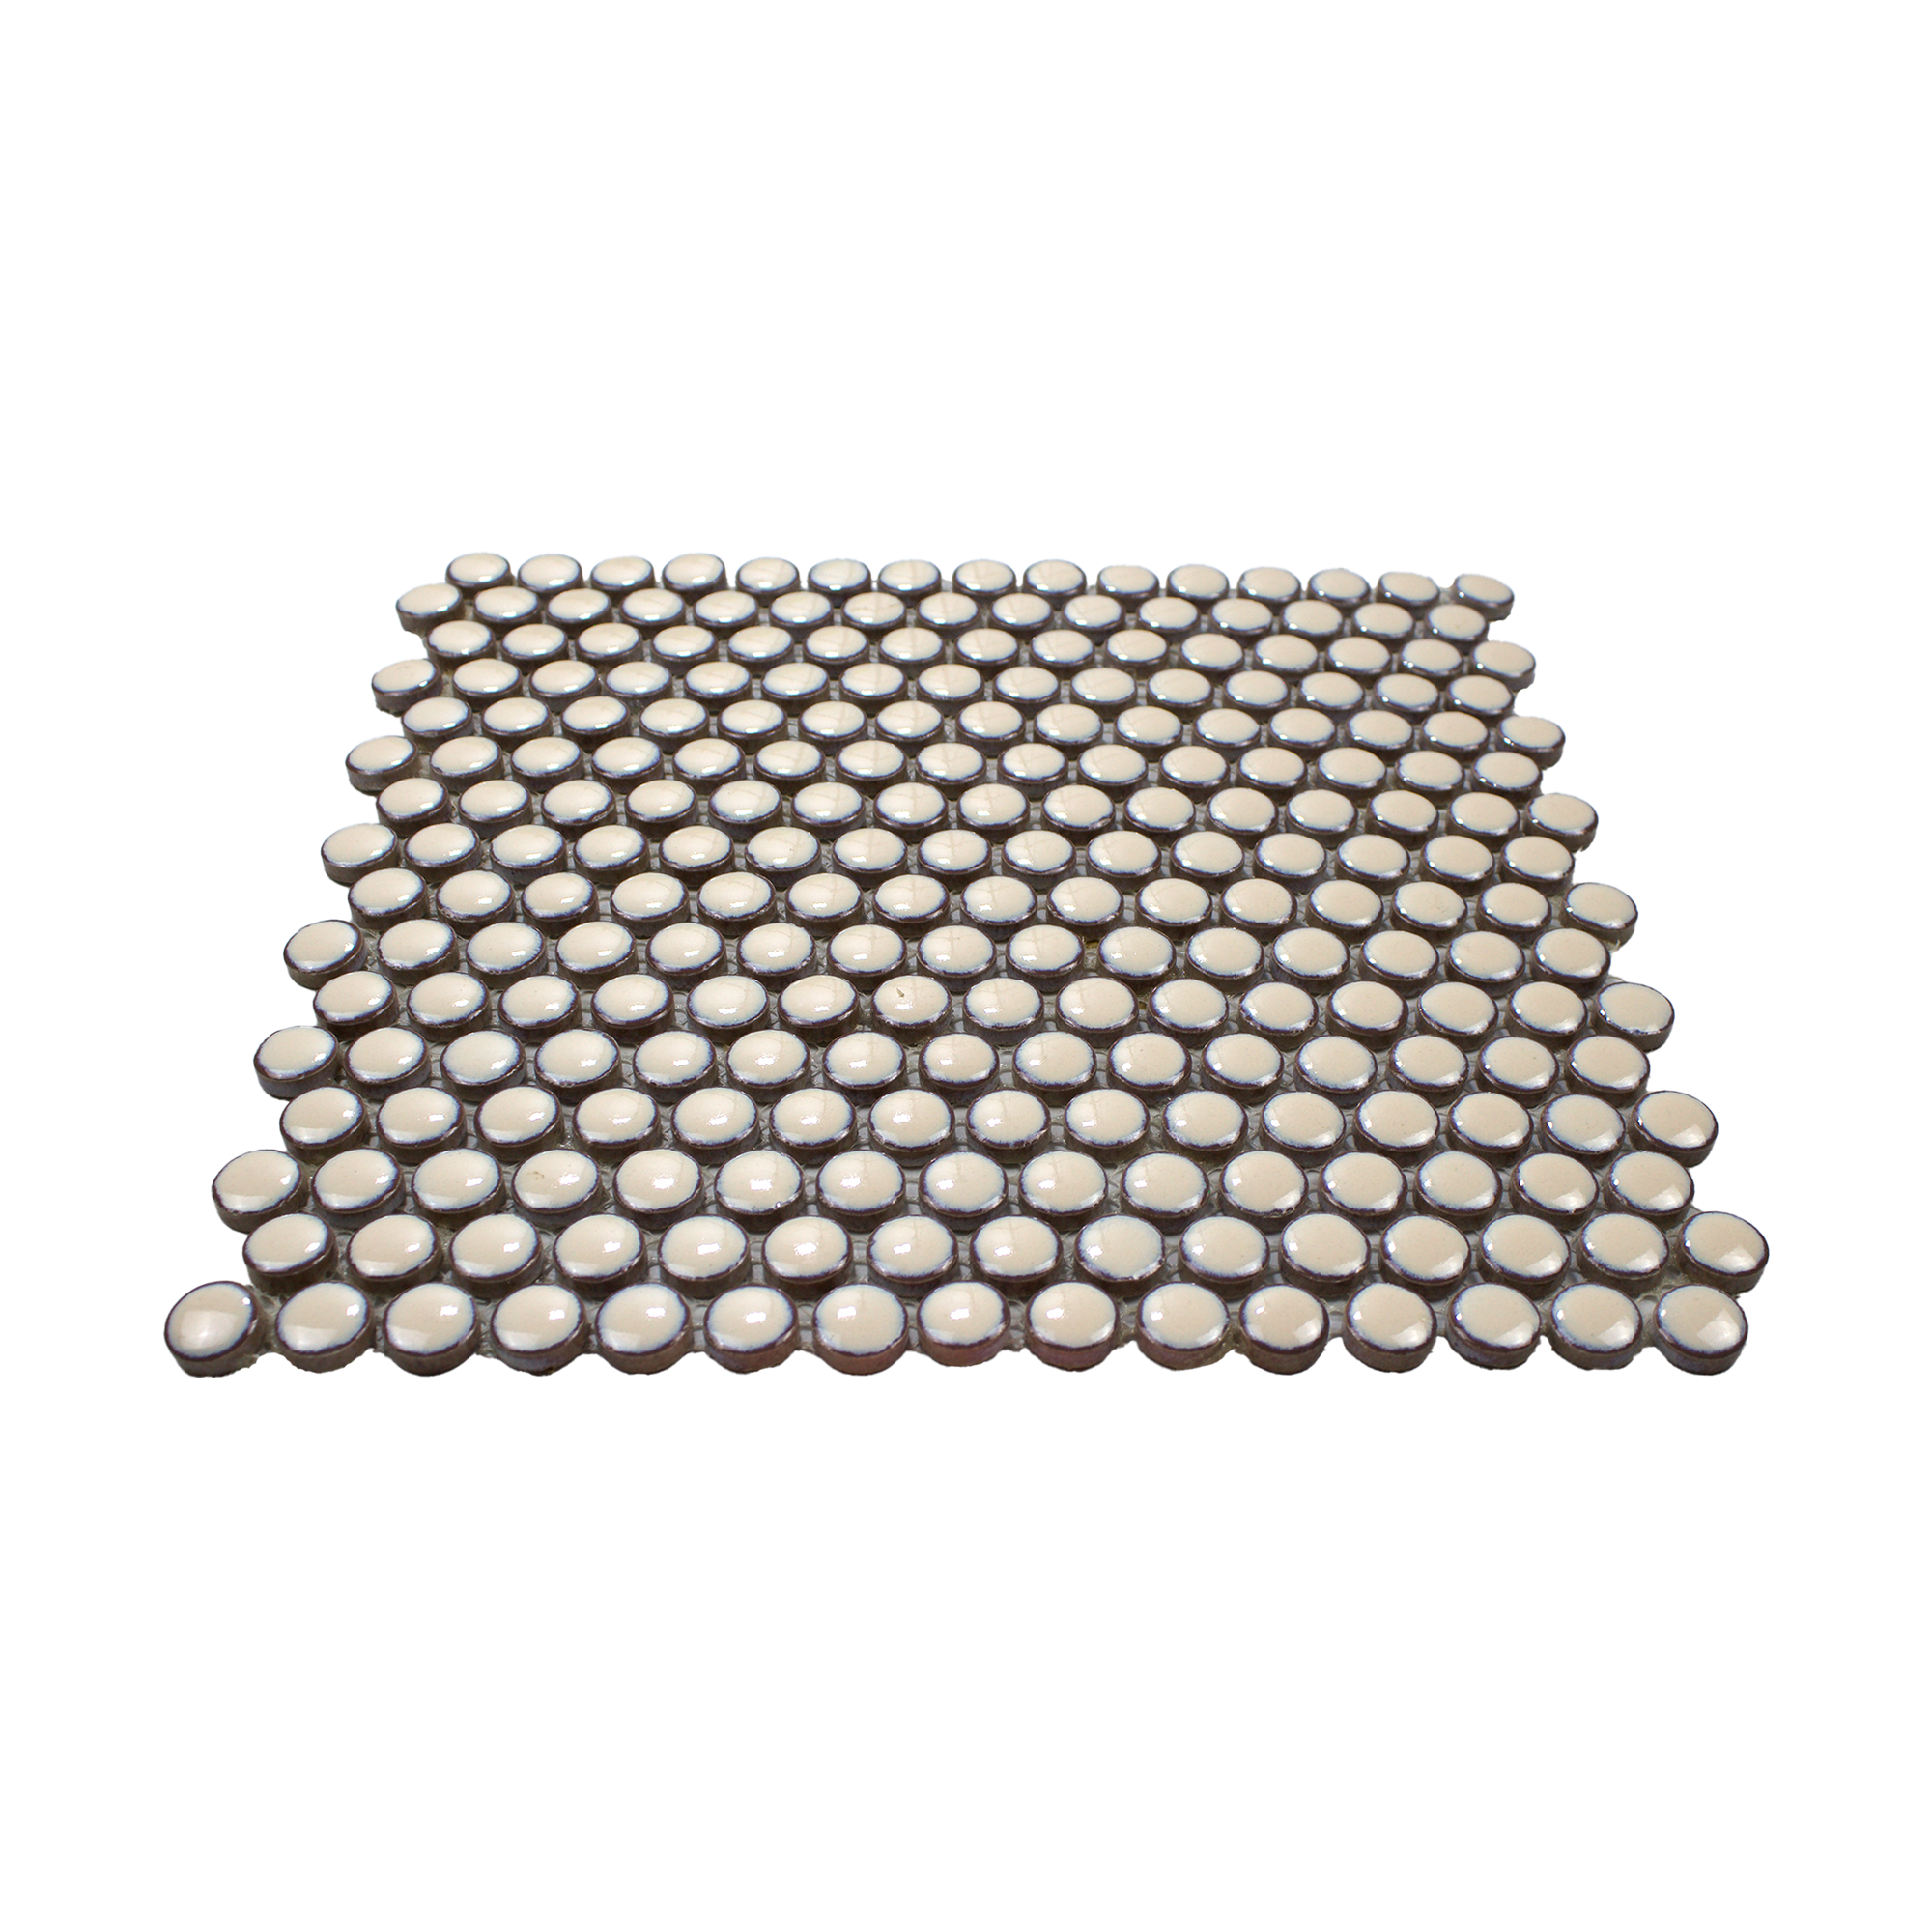 Off White with Brown Border Glossy Penny Round Mosaic Tile - Lot of 79.2 Sq ft